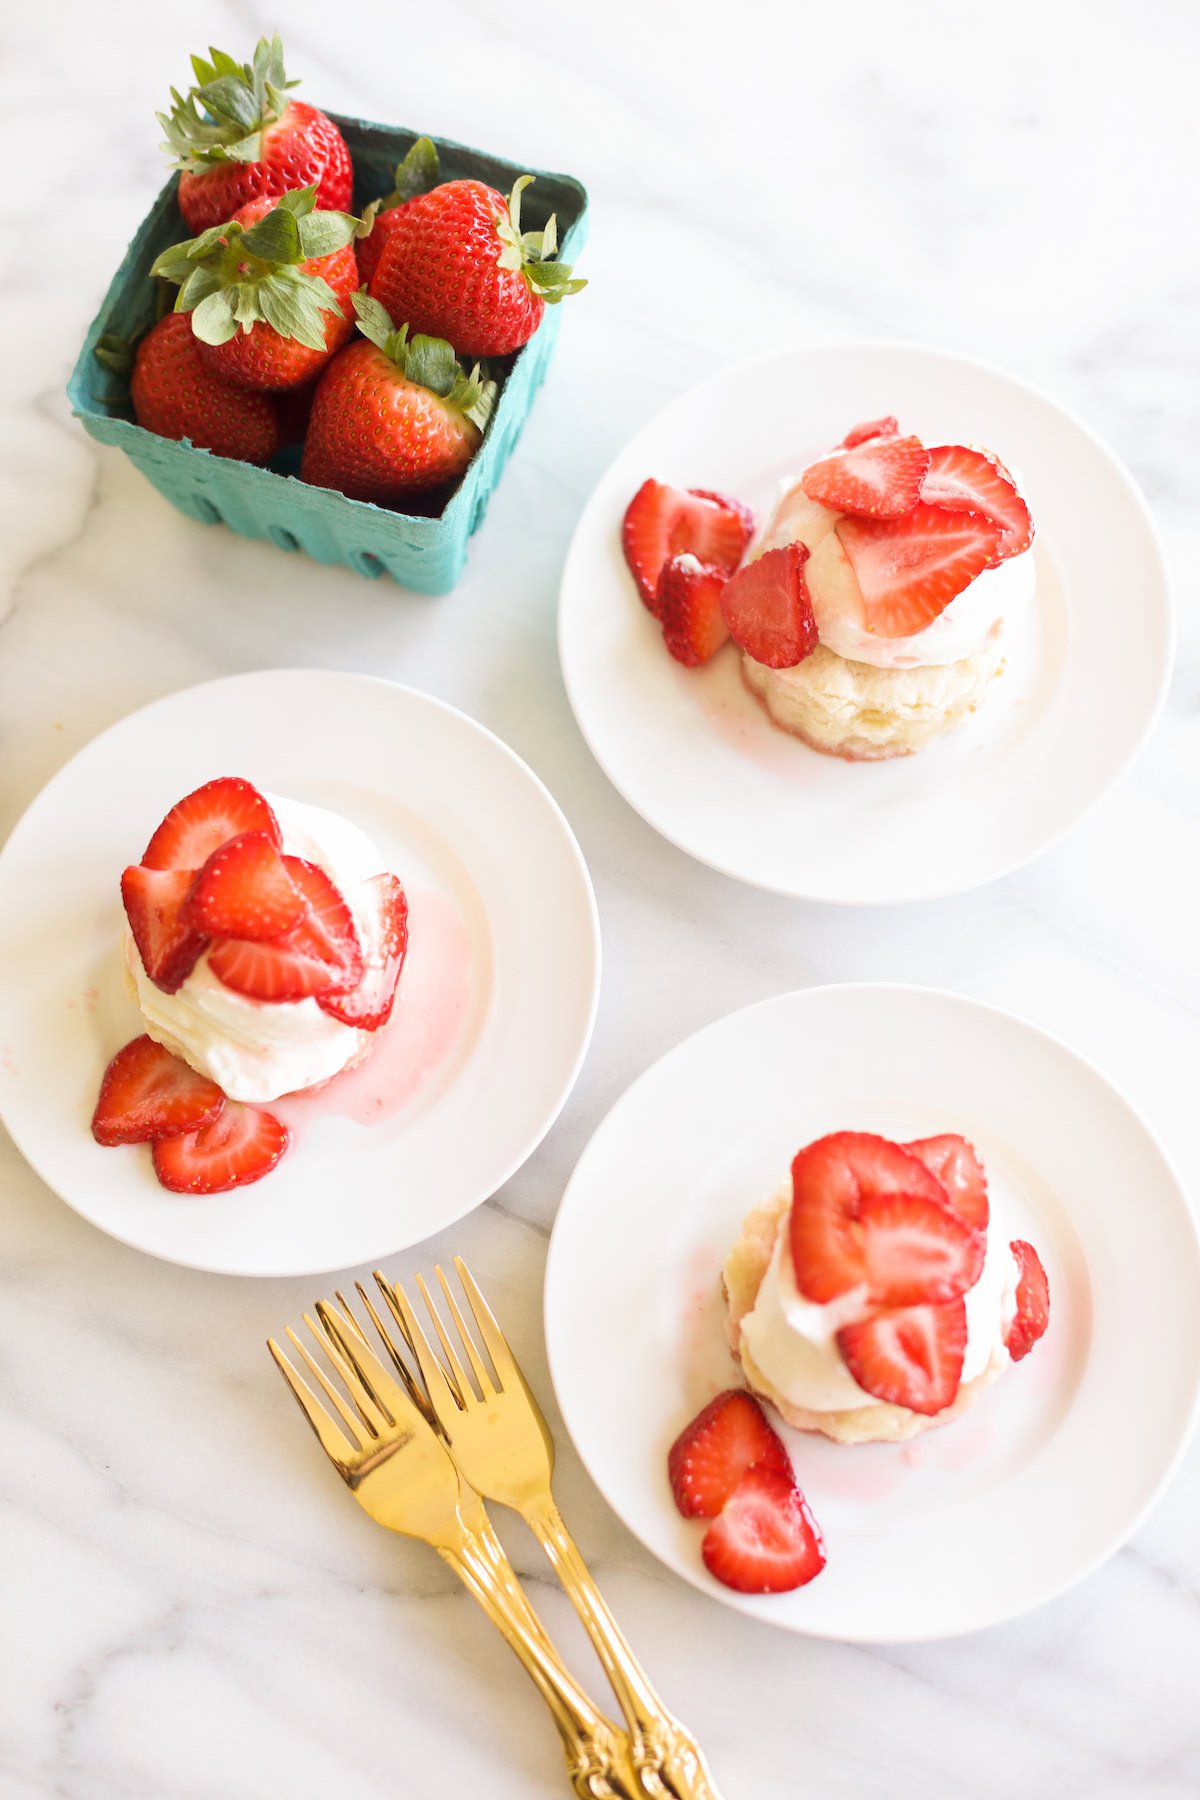 Small plates of strawberry shortcake served with whipped cream and sliced strawberries, set next to a basket of fresh strawberries and three golden forks on a marble surface. This delightful setup is perfect for those seeking exquisite strawberry recipes.